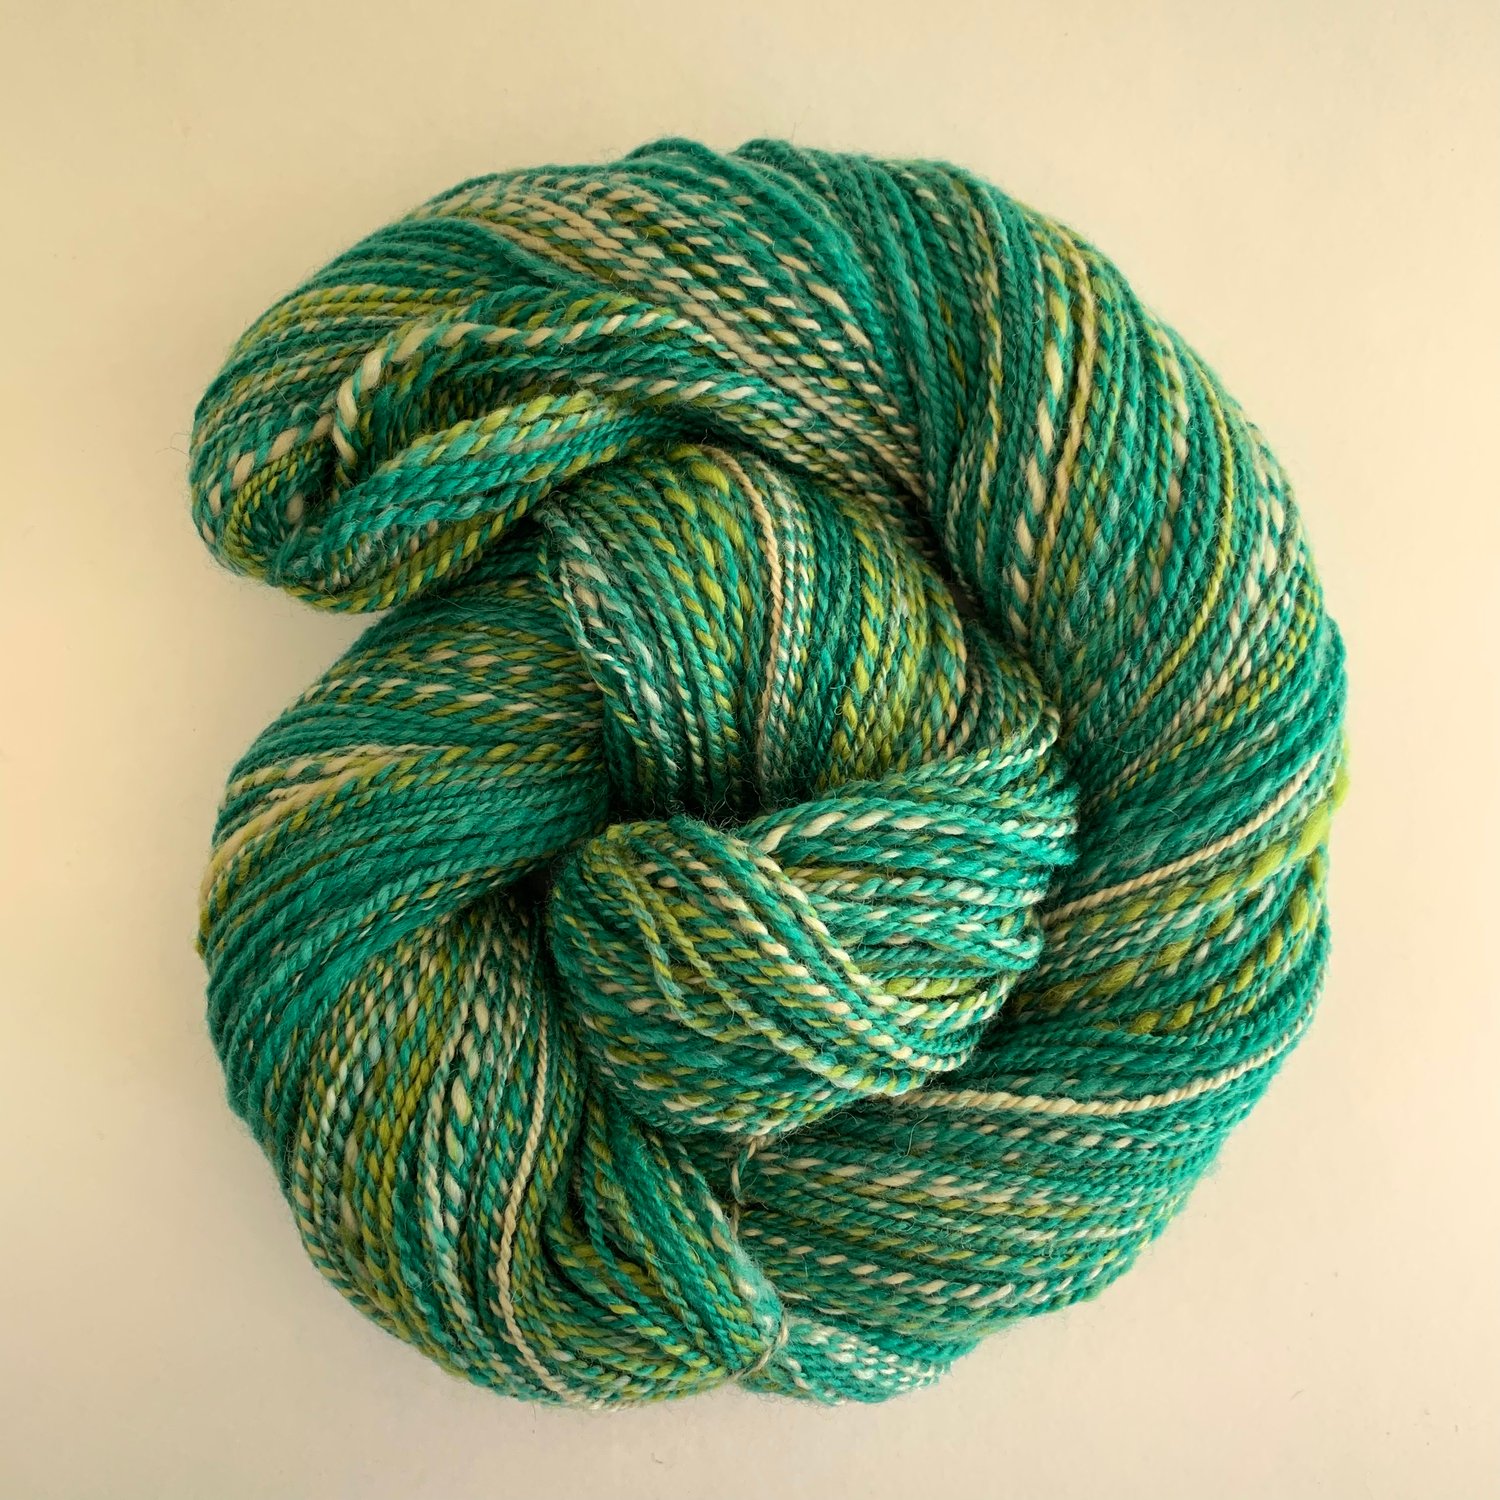 Hand Dyed and Hand Spun 2 Ply Green and Tan Yarn - BFL